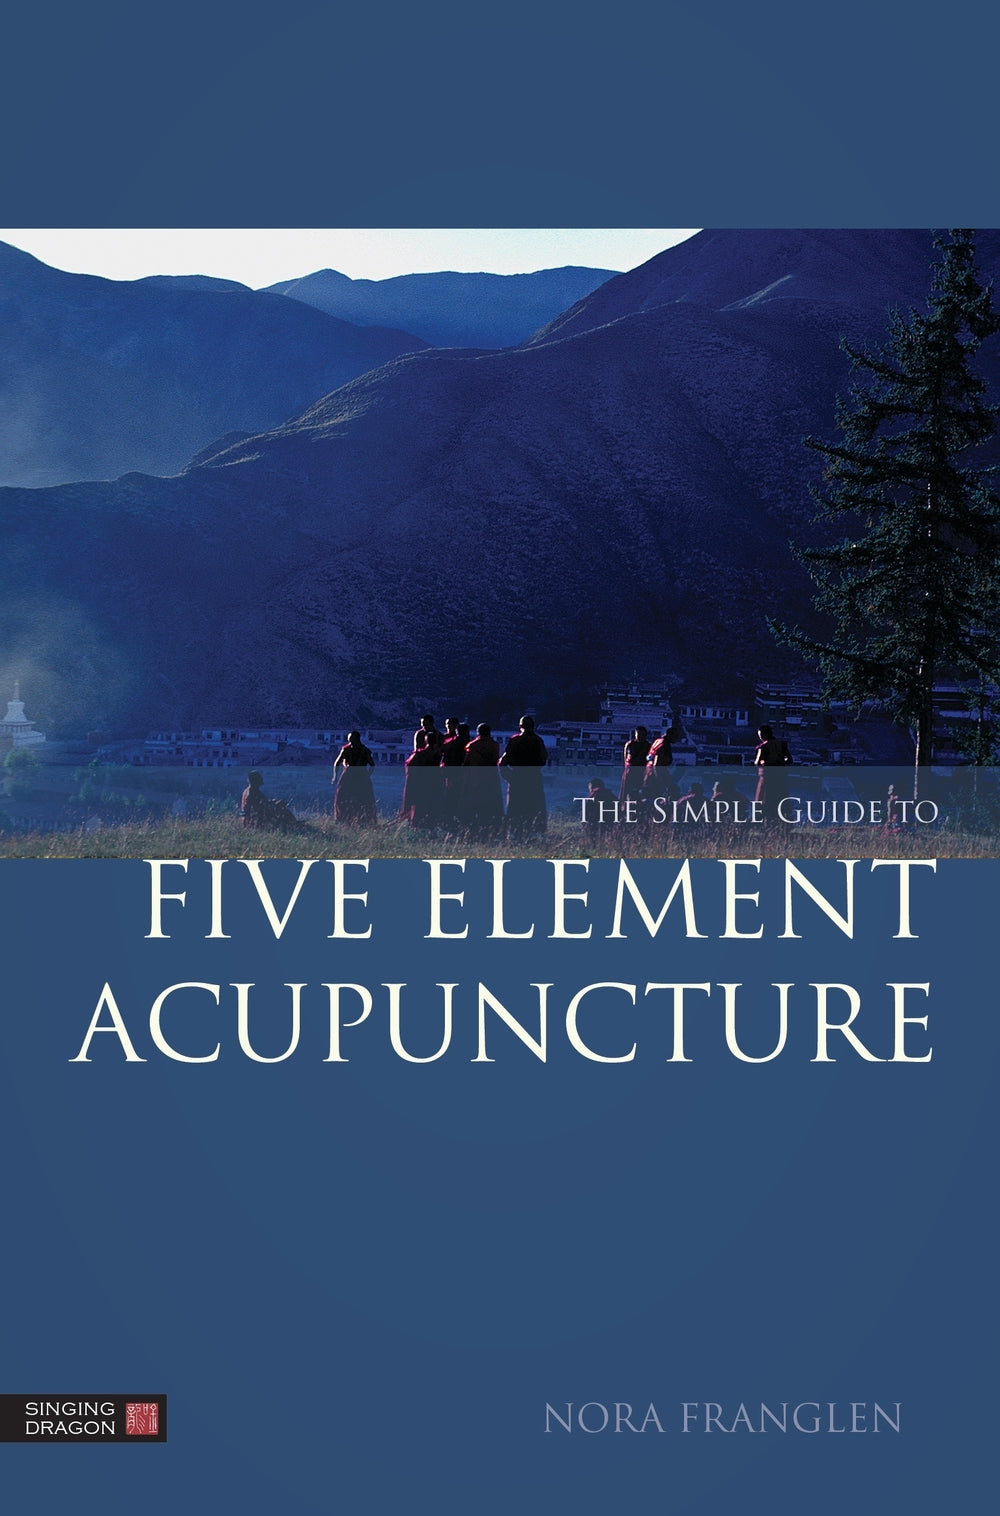 The Simple Guide to Five Element Acupuncture by Nora Franglen